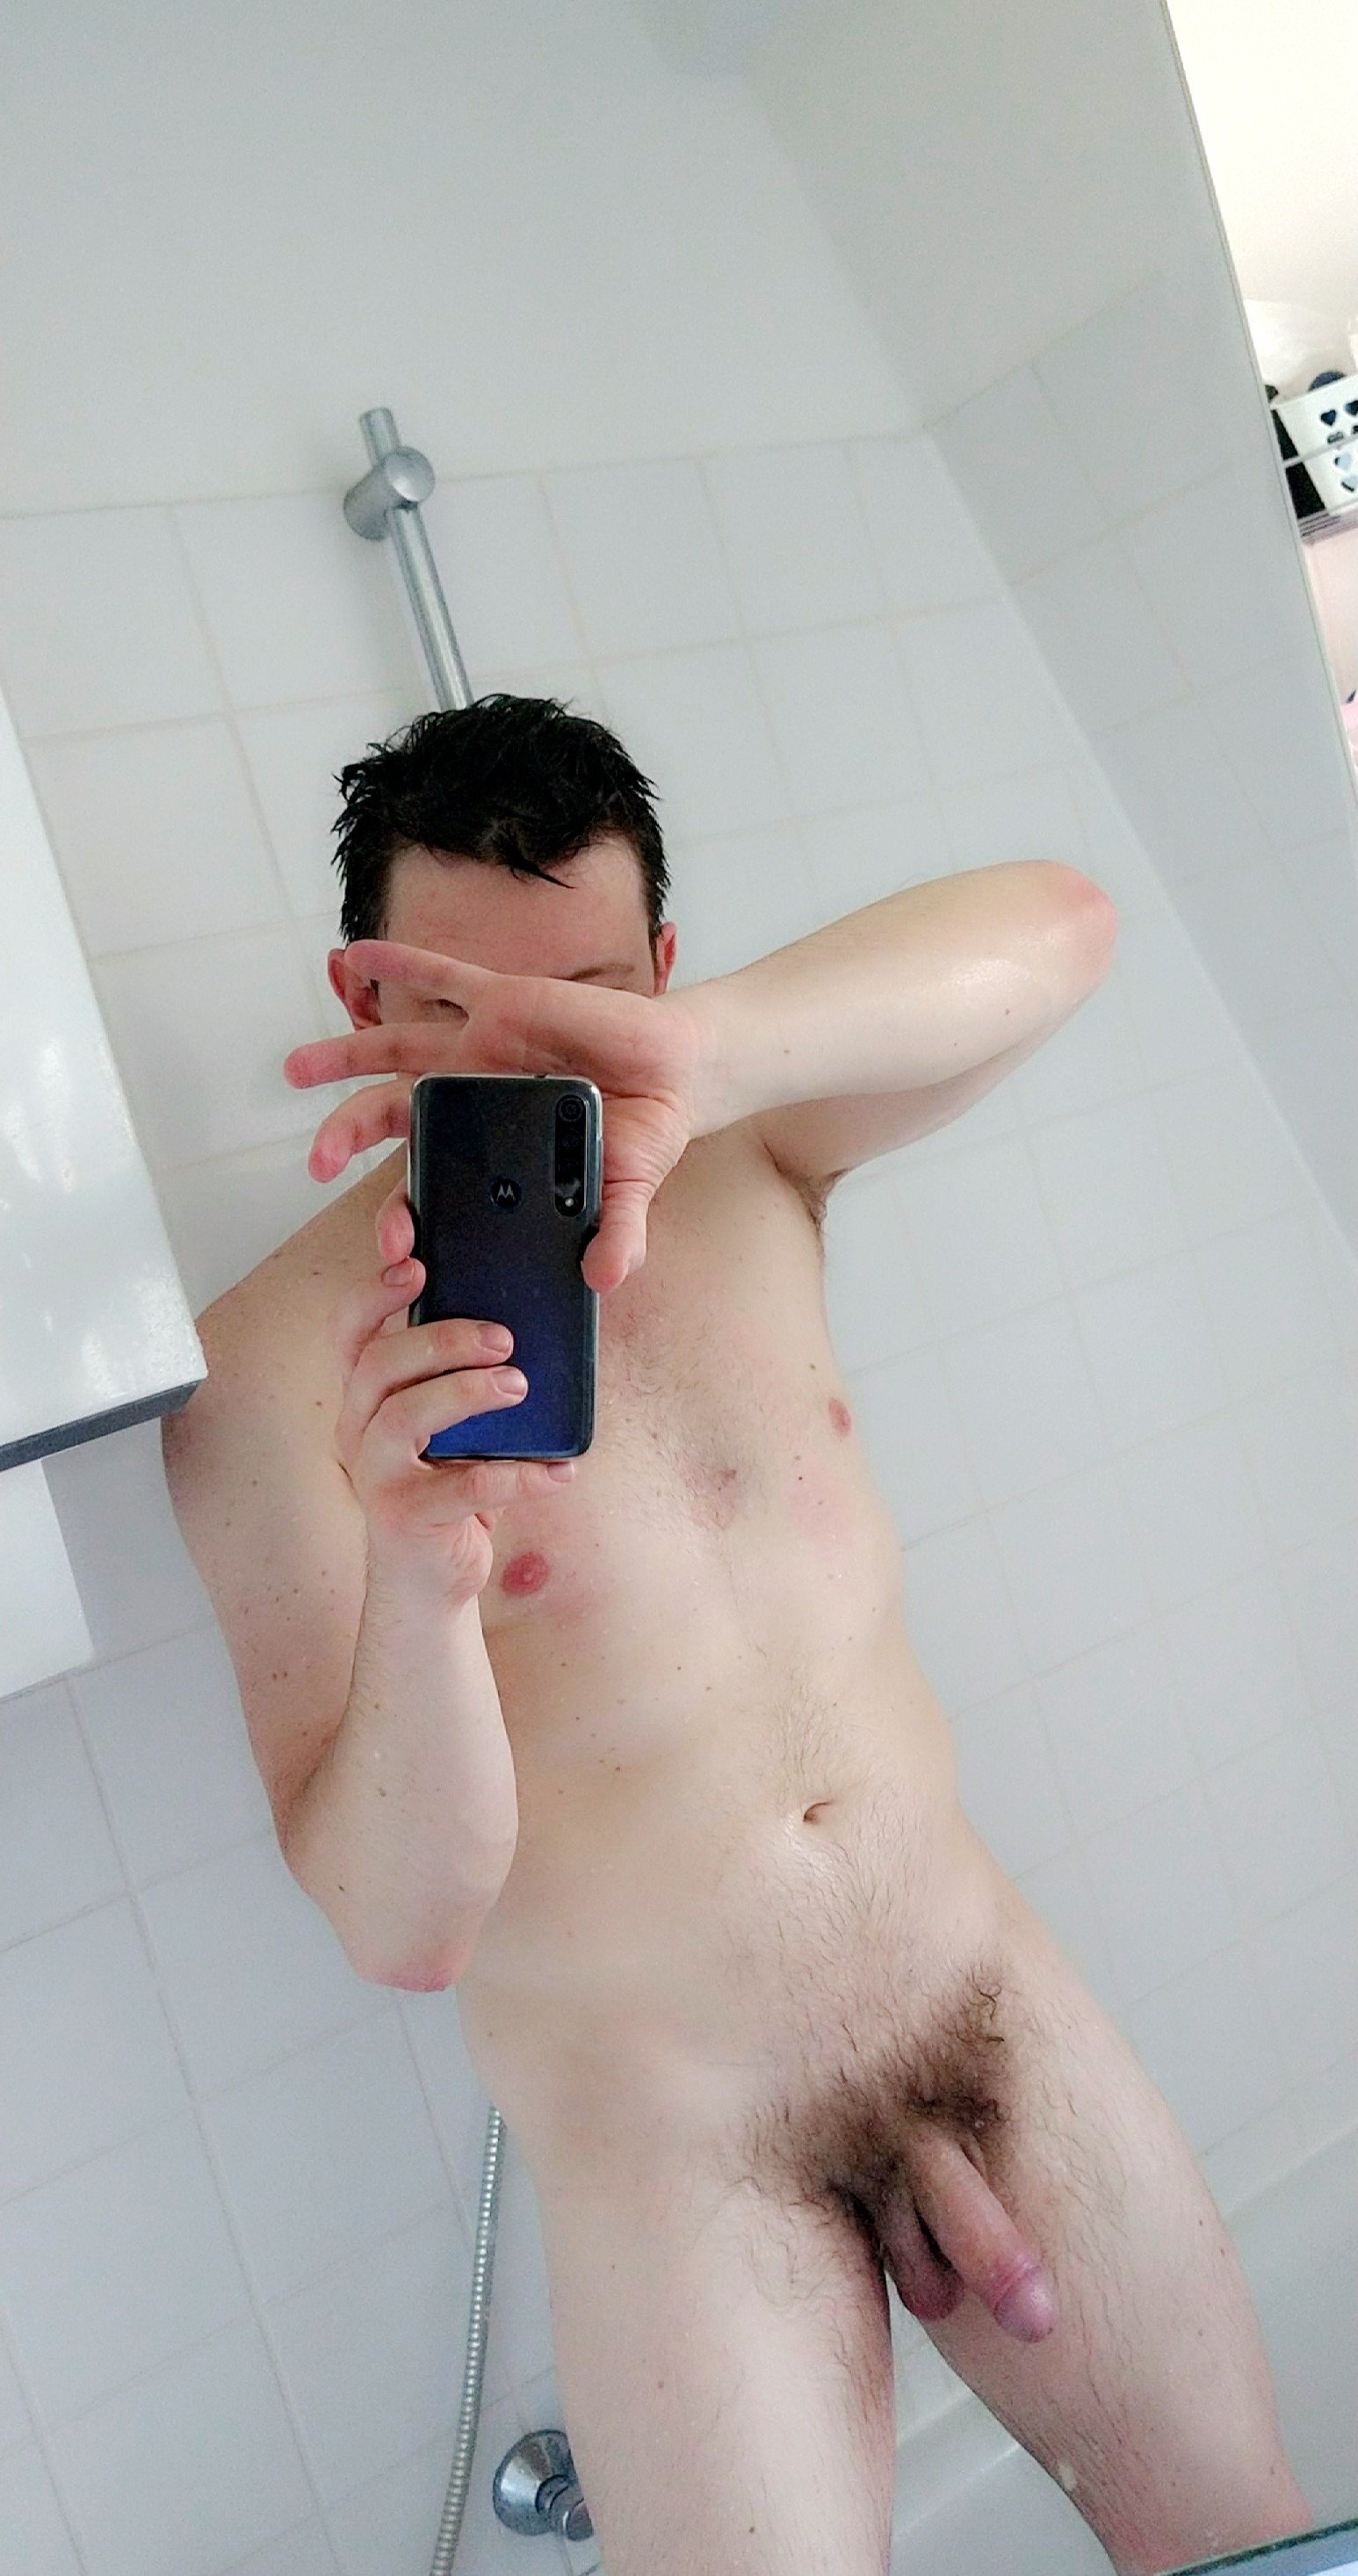 Photo by funguy5180 with the username @funguy5180, who is a verified user,  July 26, 2020 at 6:07 PM. The post is about the topic Sexy Selfhot and the text says '#Sunday #shower #selfie
... U can share, like or comment
#me #amateur #mirror #homemade #german #guy #dick'